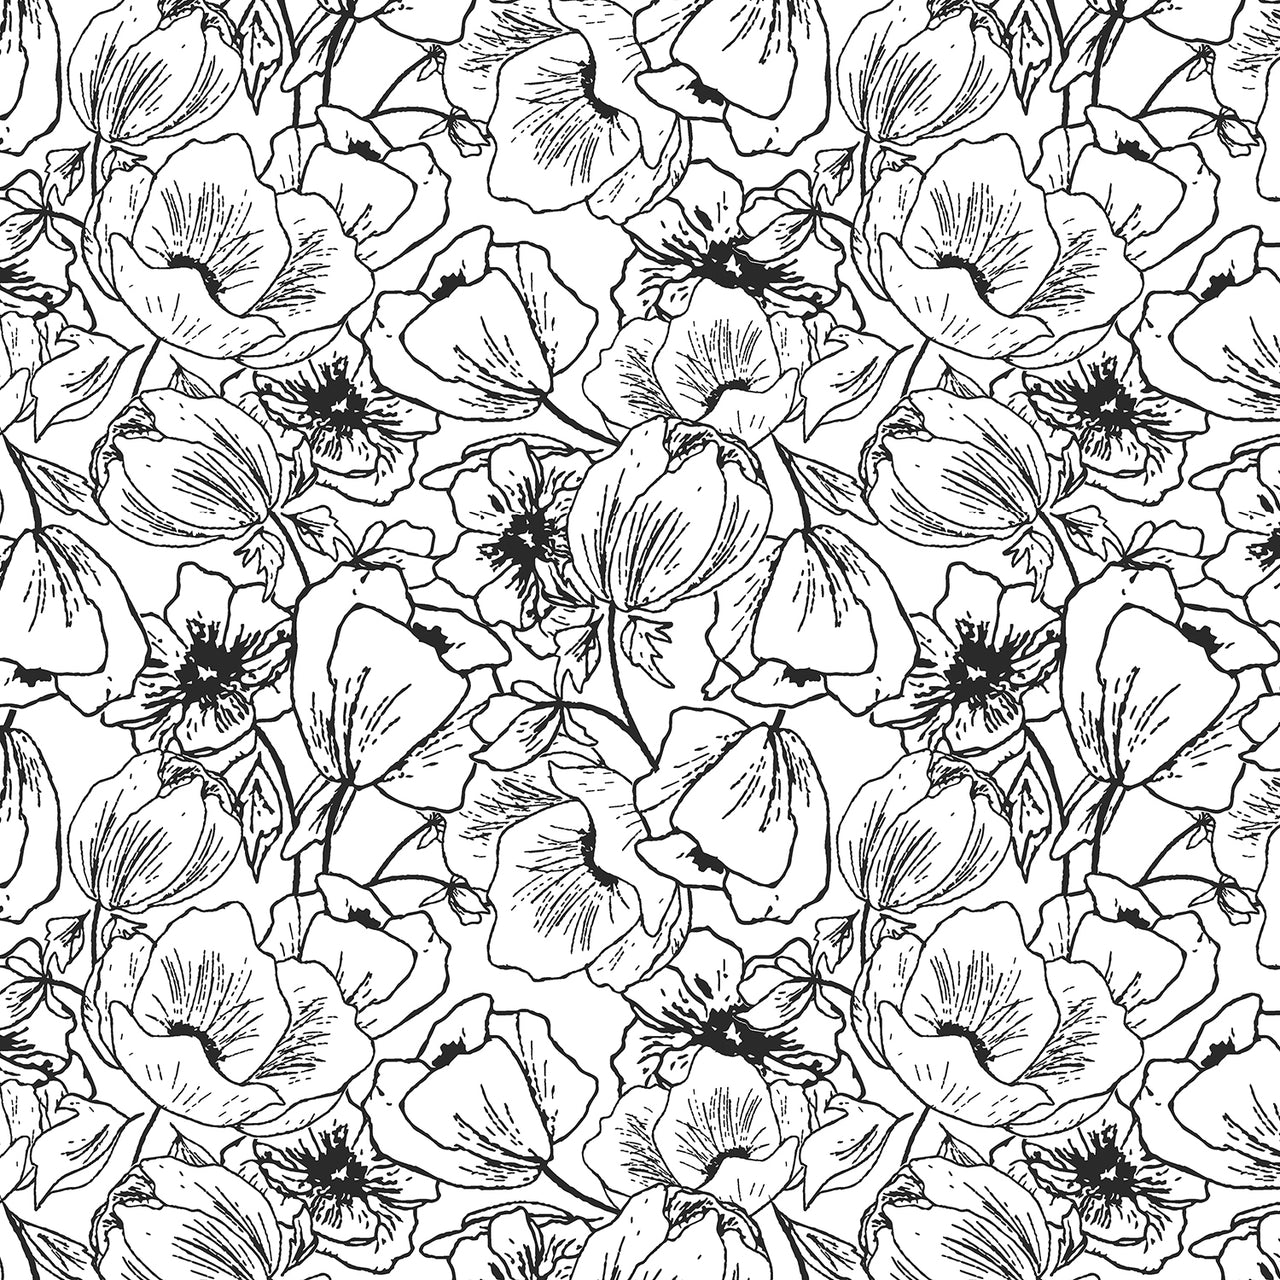 Nightfall : Anemones in Black and White : Cotton and Steel